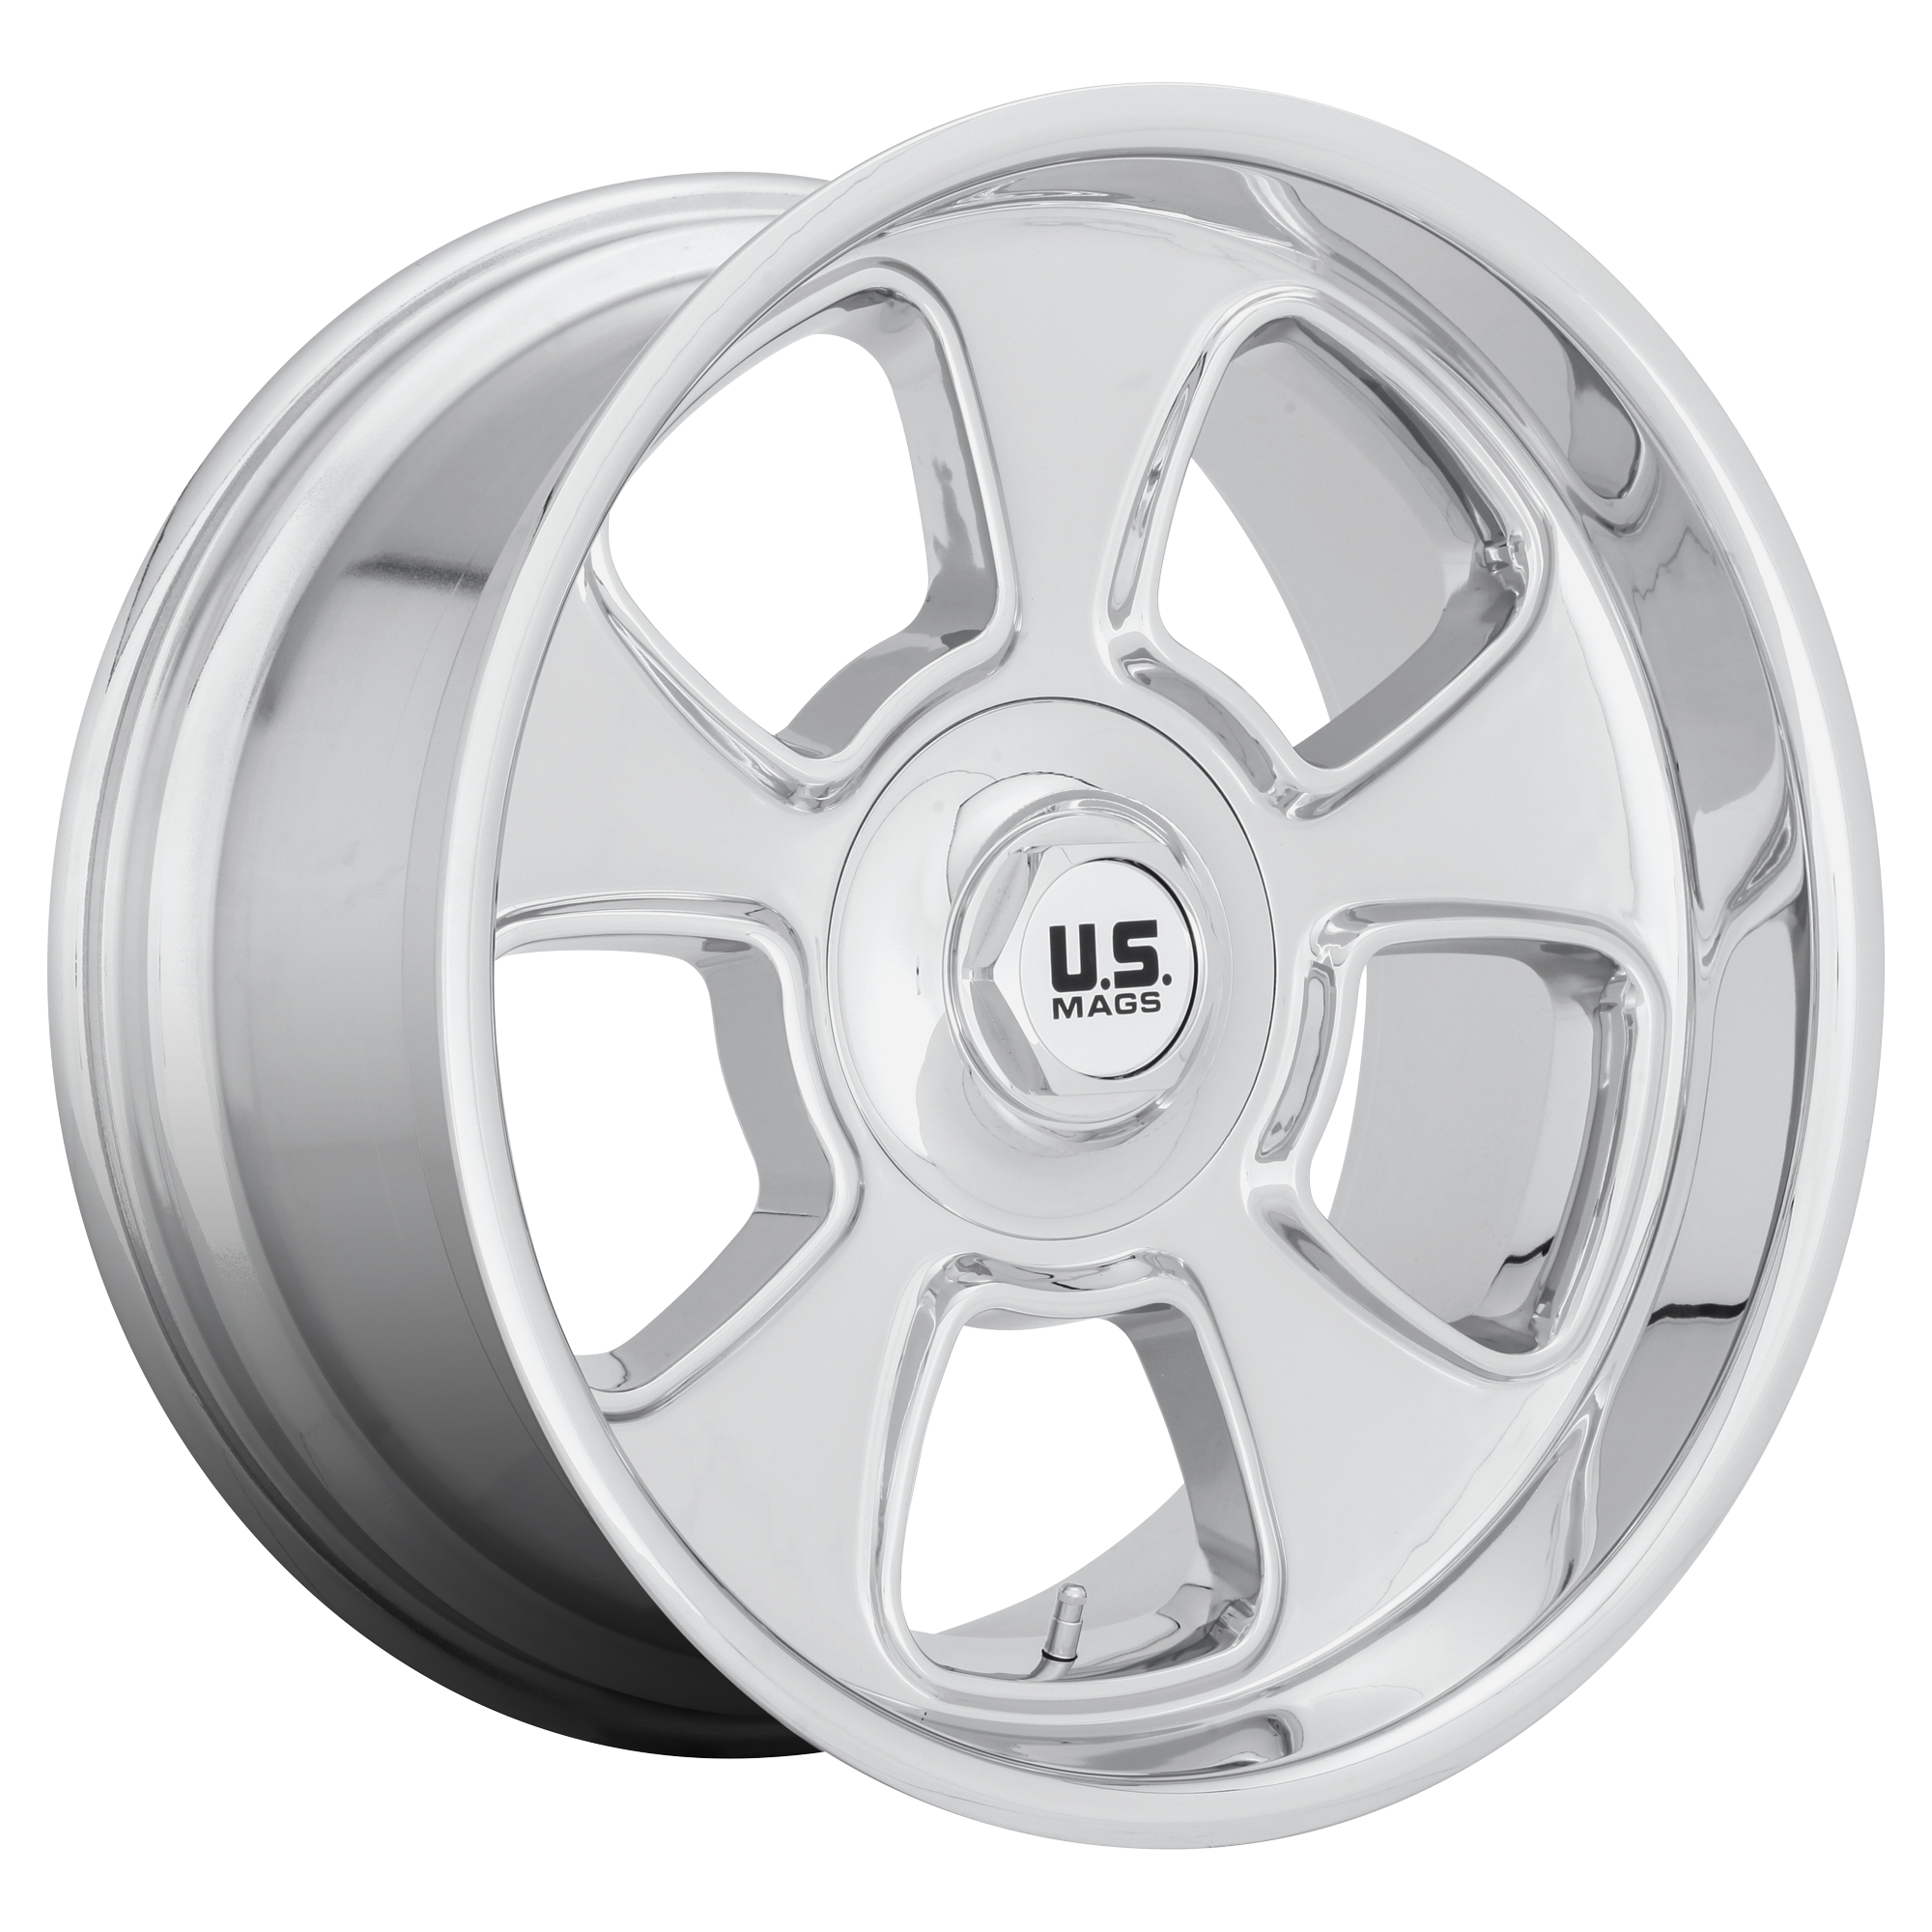 BOULEVARD 20x8 6x139.70 CHROME PLATED (1 mm) - Tires and Engine Performance